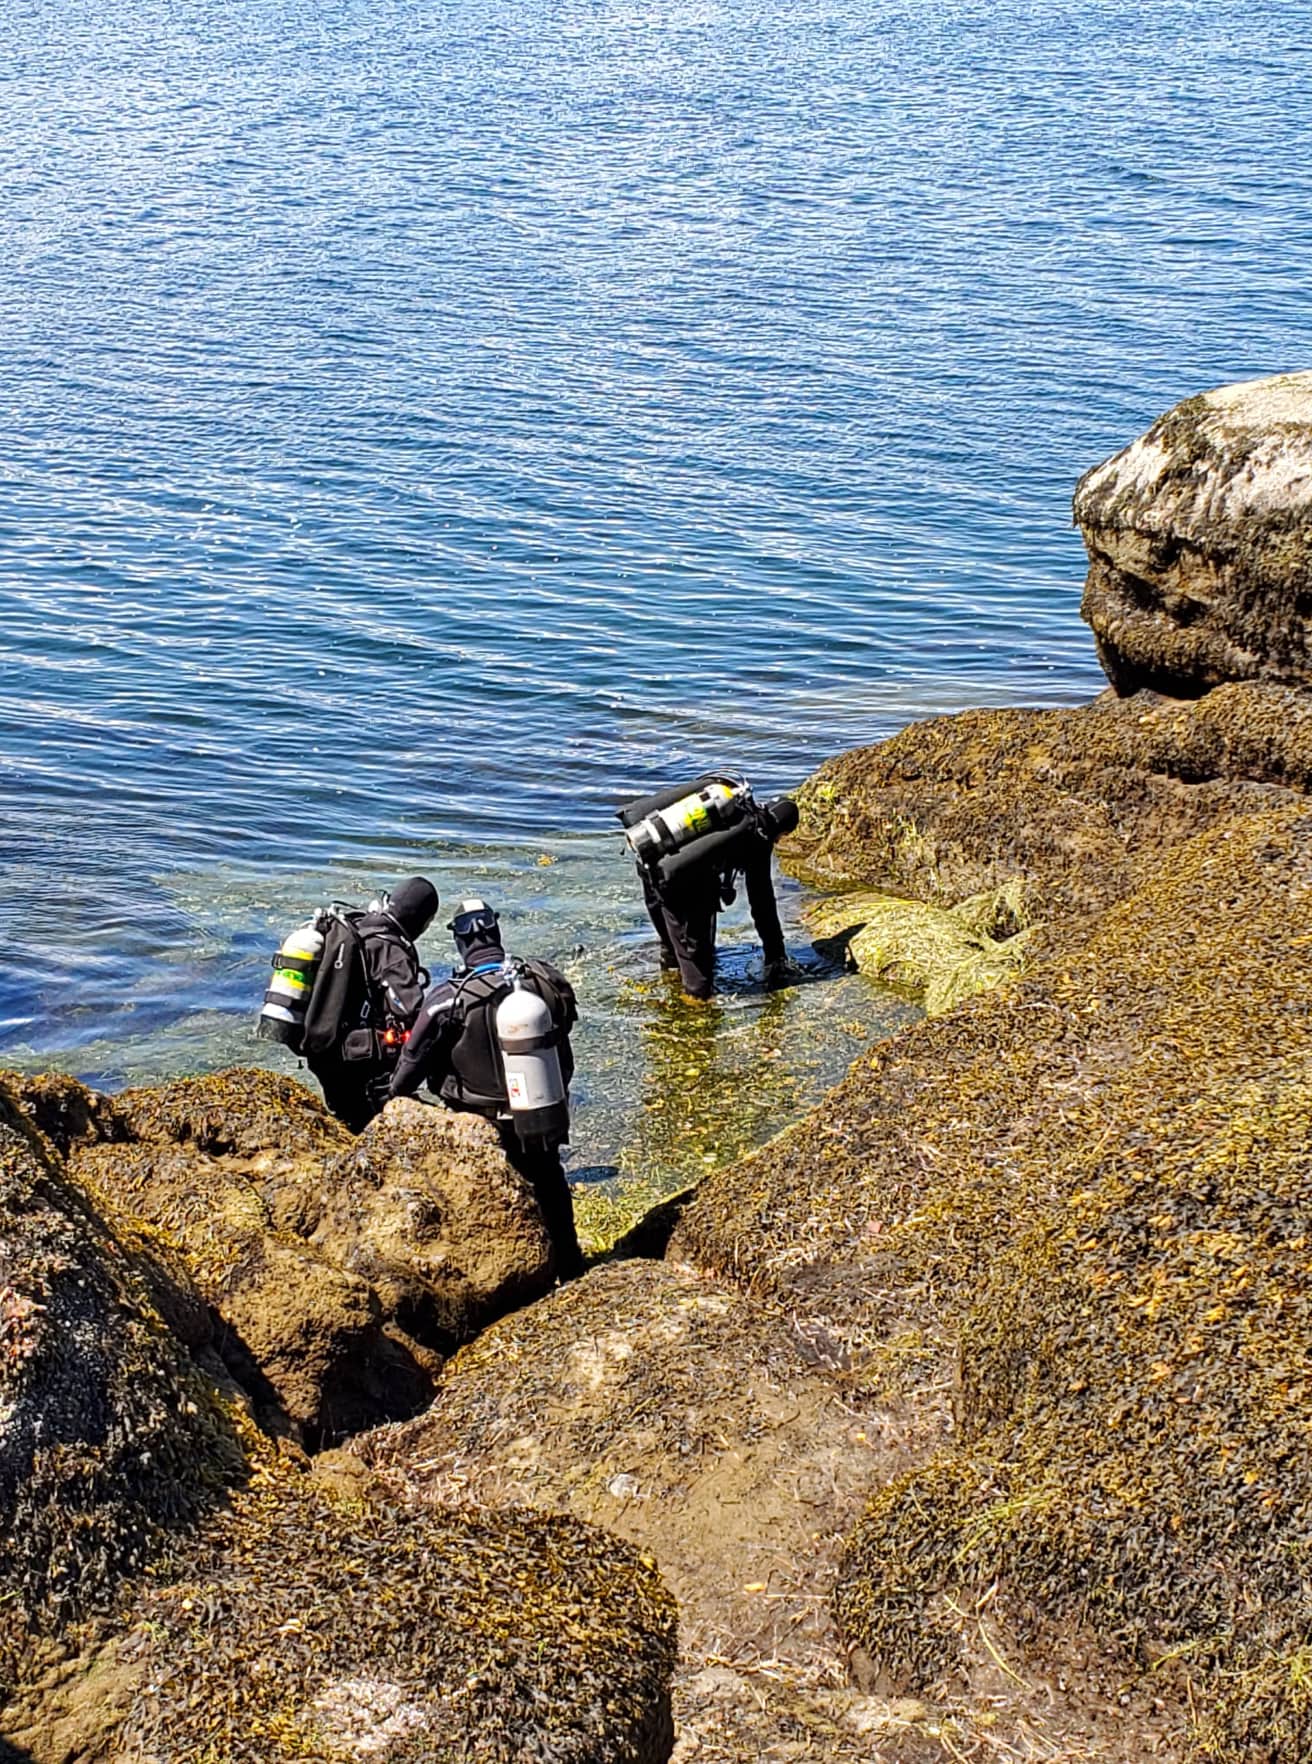 Two equipped scuba divers approach the water from a rocky shore line, led by their guide.